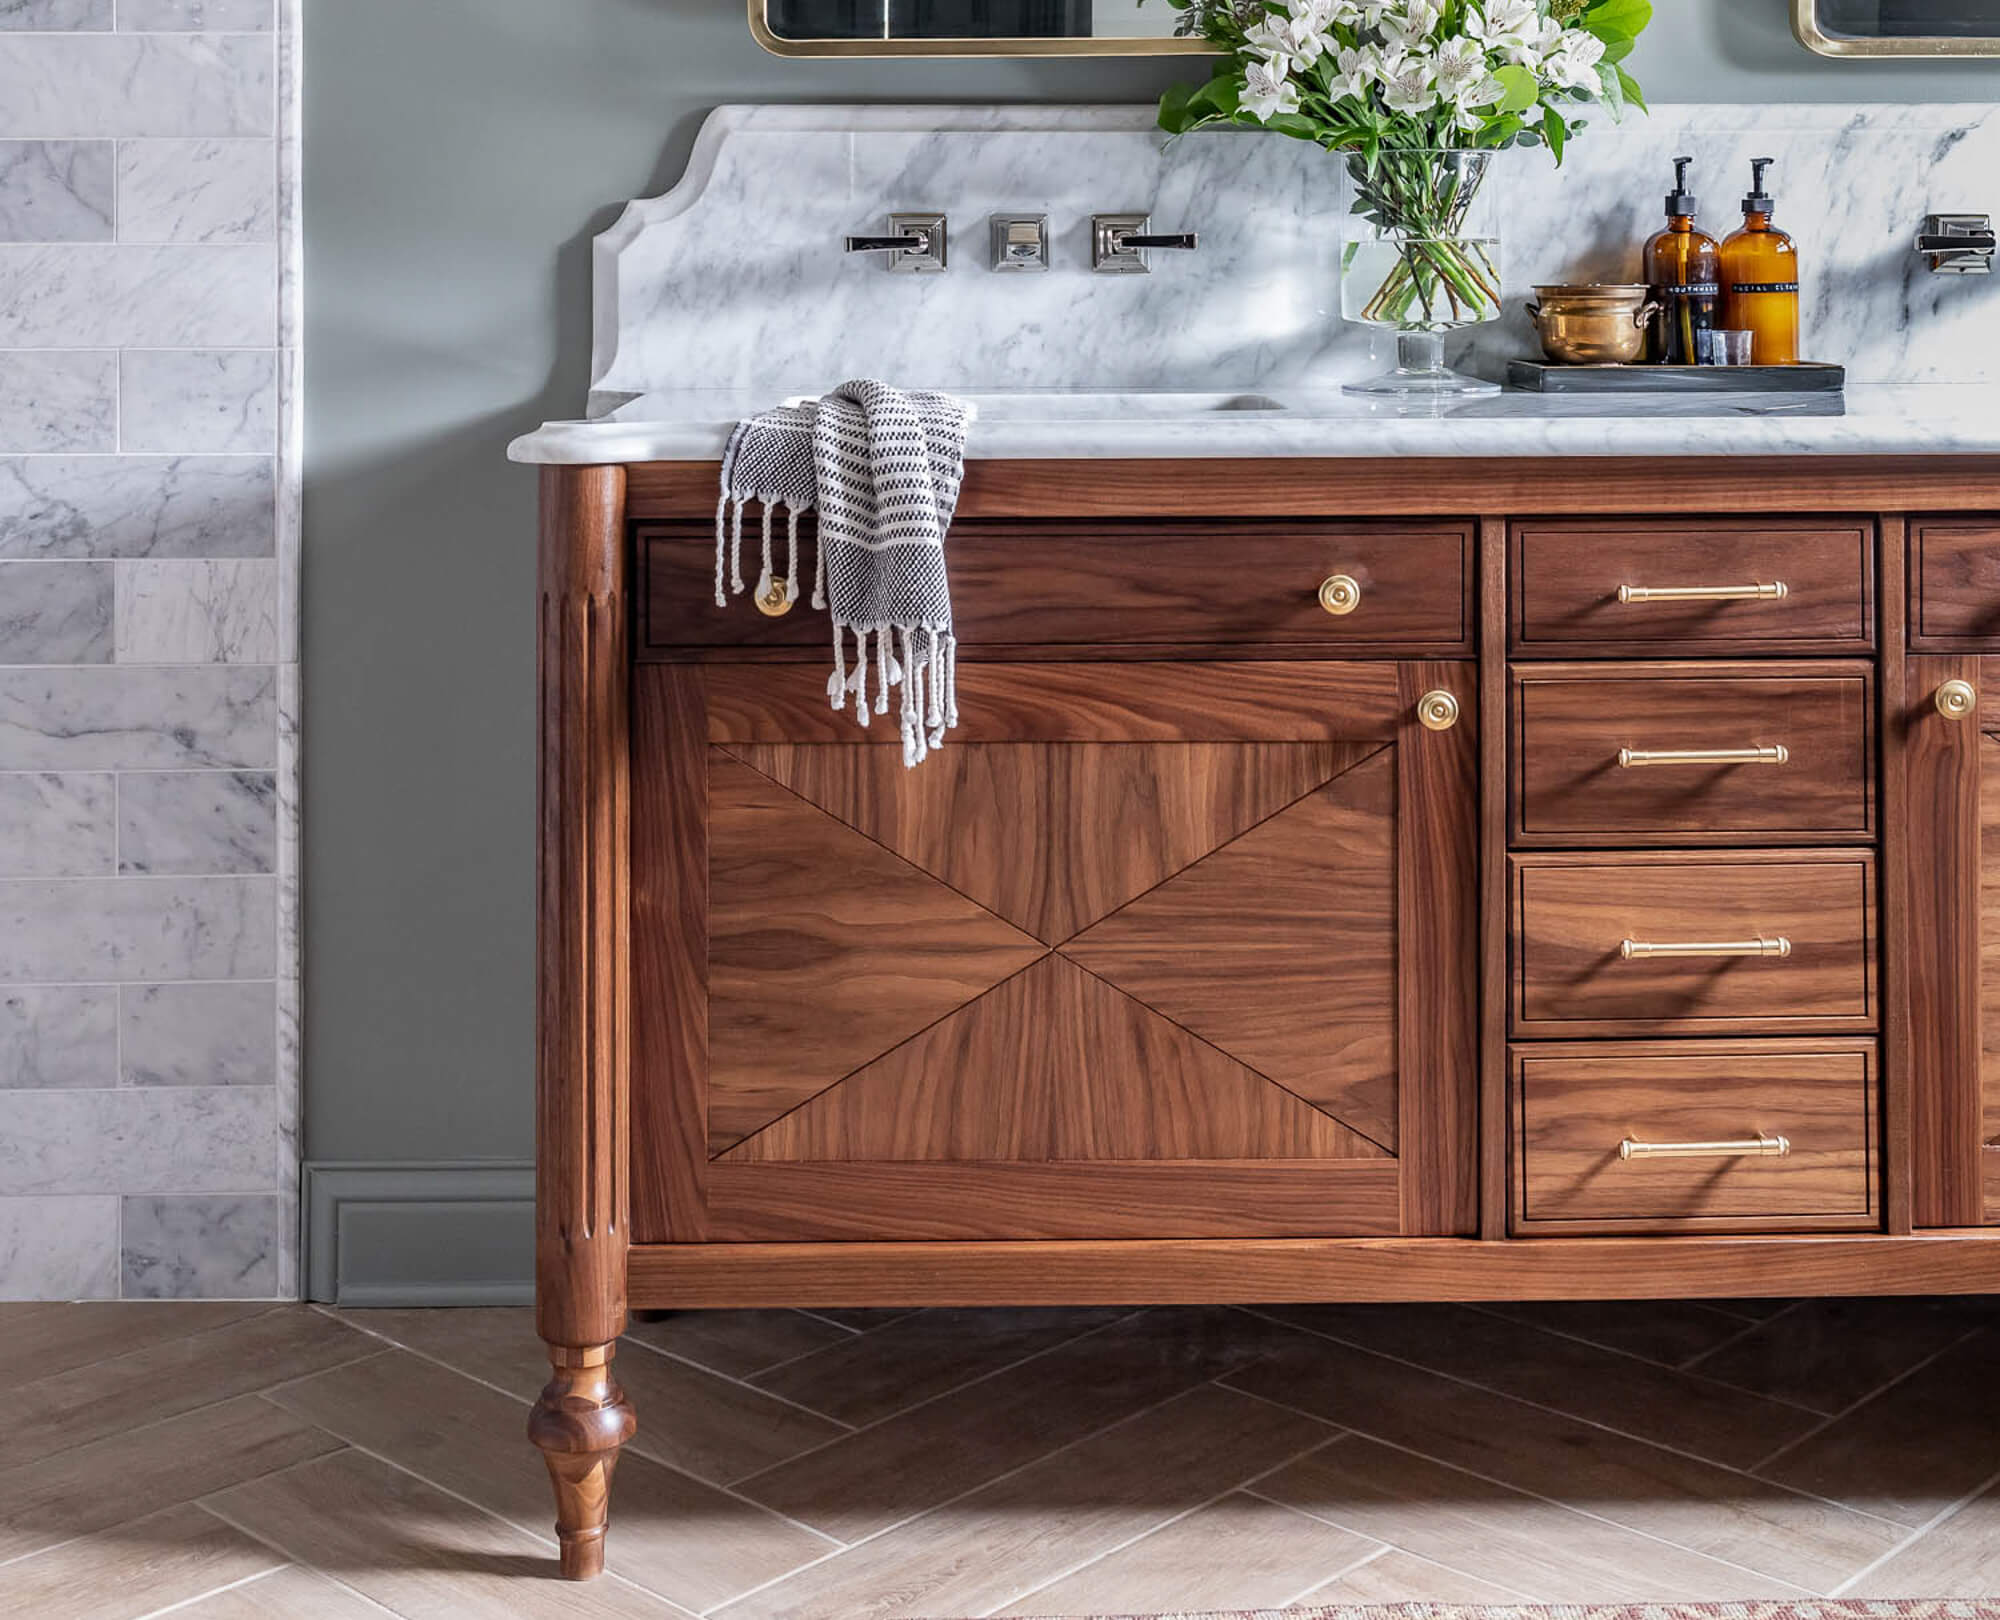 A beautiful black walnut bathroom vanity inspired by Louis XVI furniture built and designed by Jen Woodhouse.